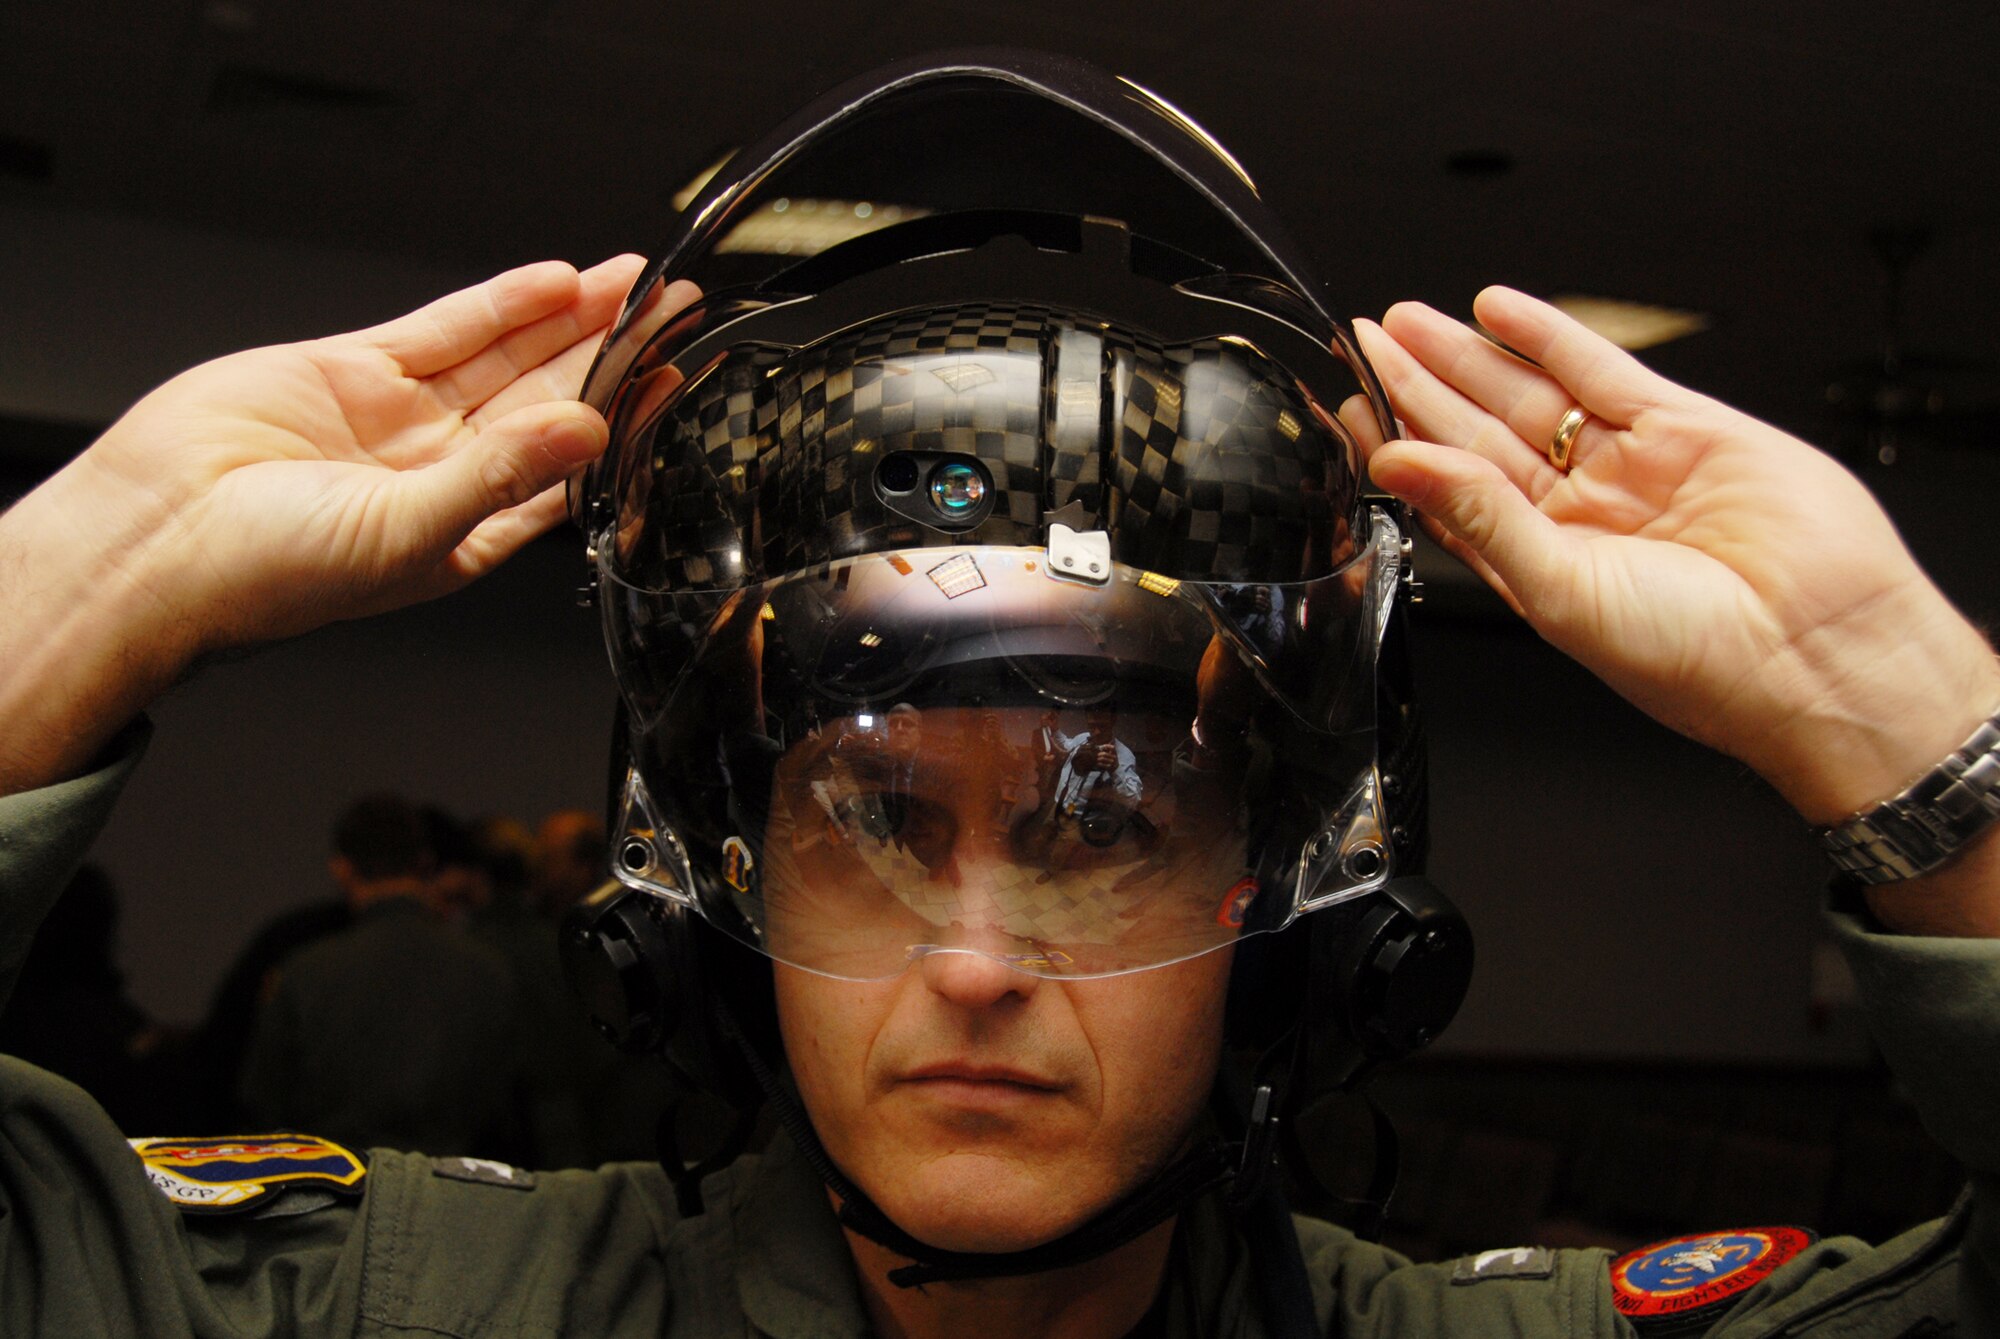 EGLIN AIR FORCE BASE, Fla. -- Navy Capt. Mike Saunders, 33rd Operations Group deputy commander, tries on the new F-35 Joint Strike Fighter helmet after getting measured for the new flight suit. The new pilot equipment includes everything from underwear to cold weather outer gear to anti-G garments. The measurement brought Eglin one step closer to being able to commence training, said Marine Col. Arthur Tomassetti, 33rd Fighter Wing commander. (U.S. Air Force photo/ Airman 1st Class Anthony Jennings)